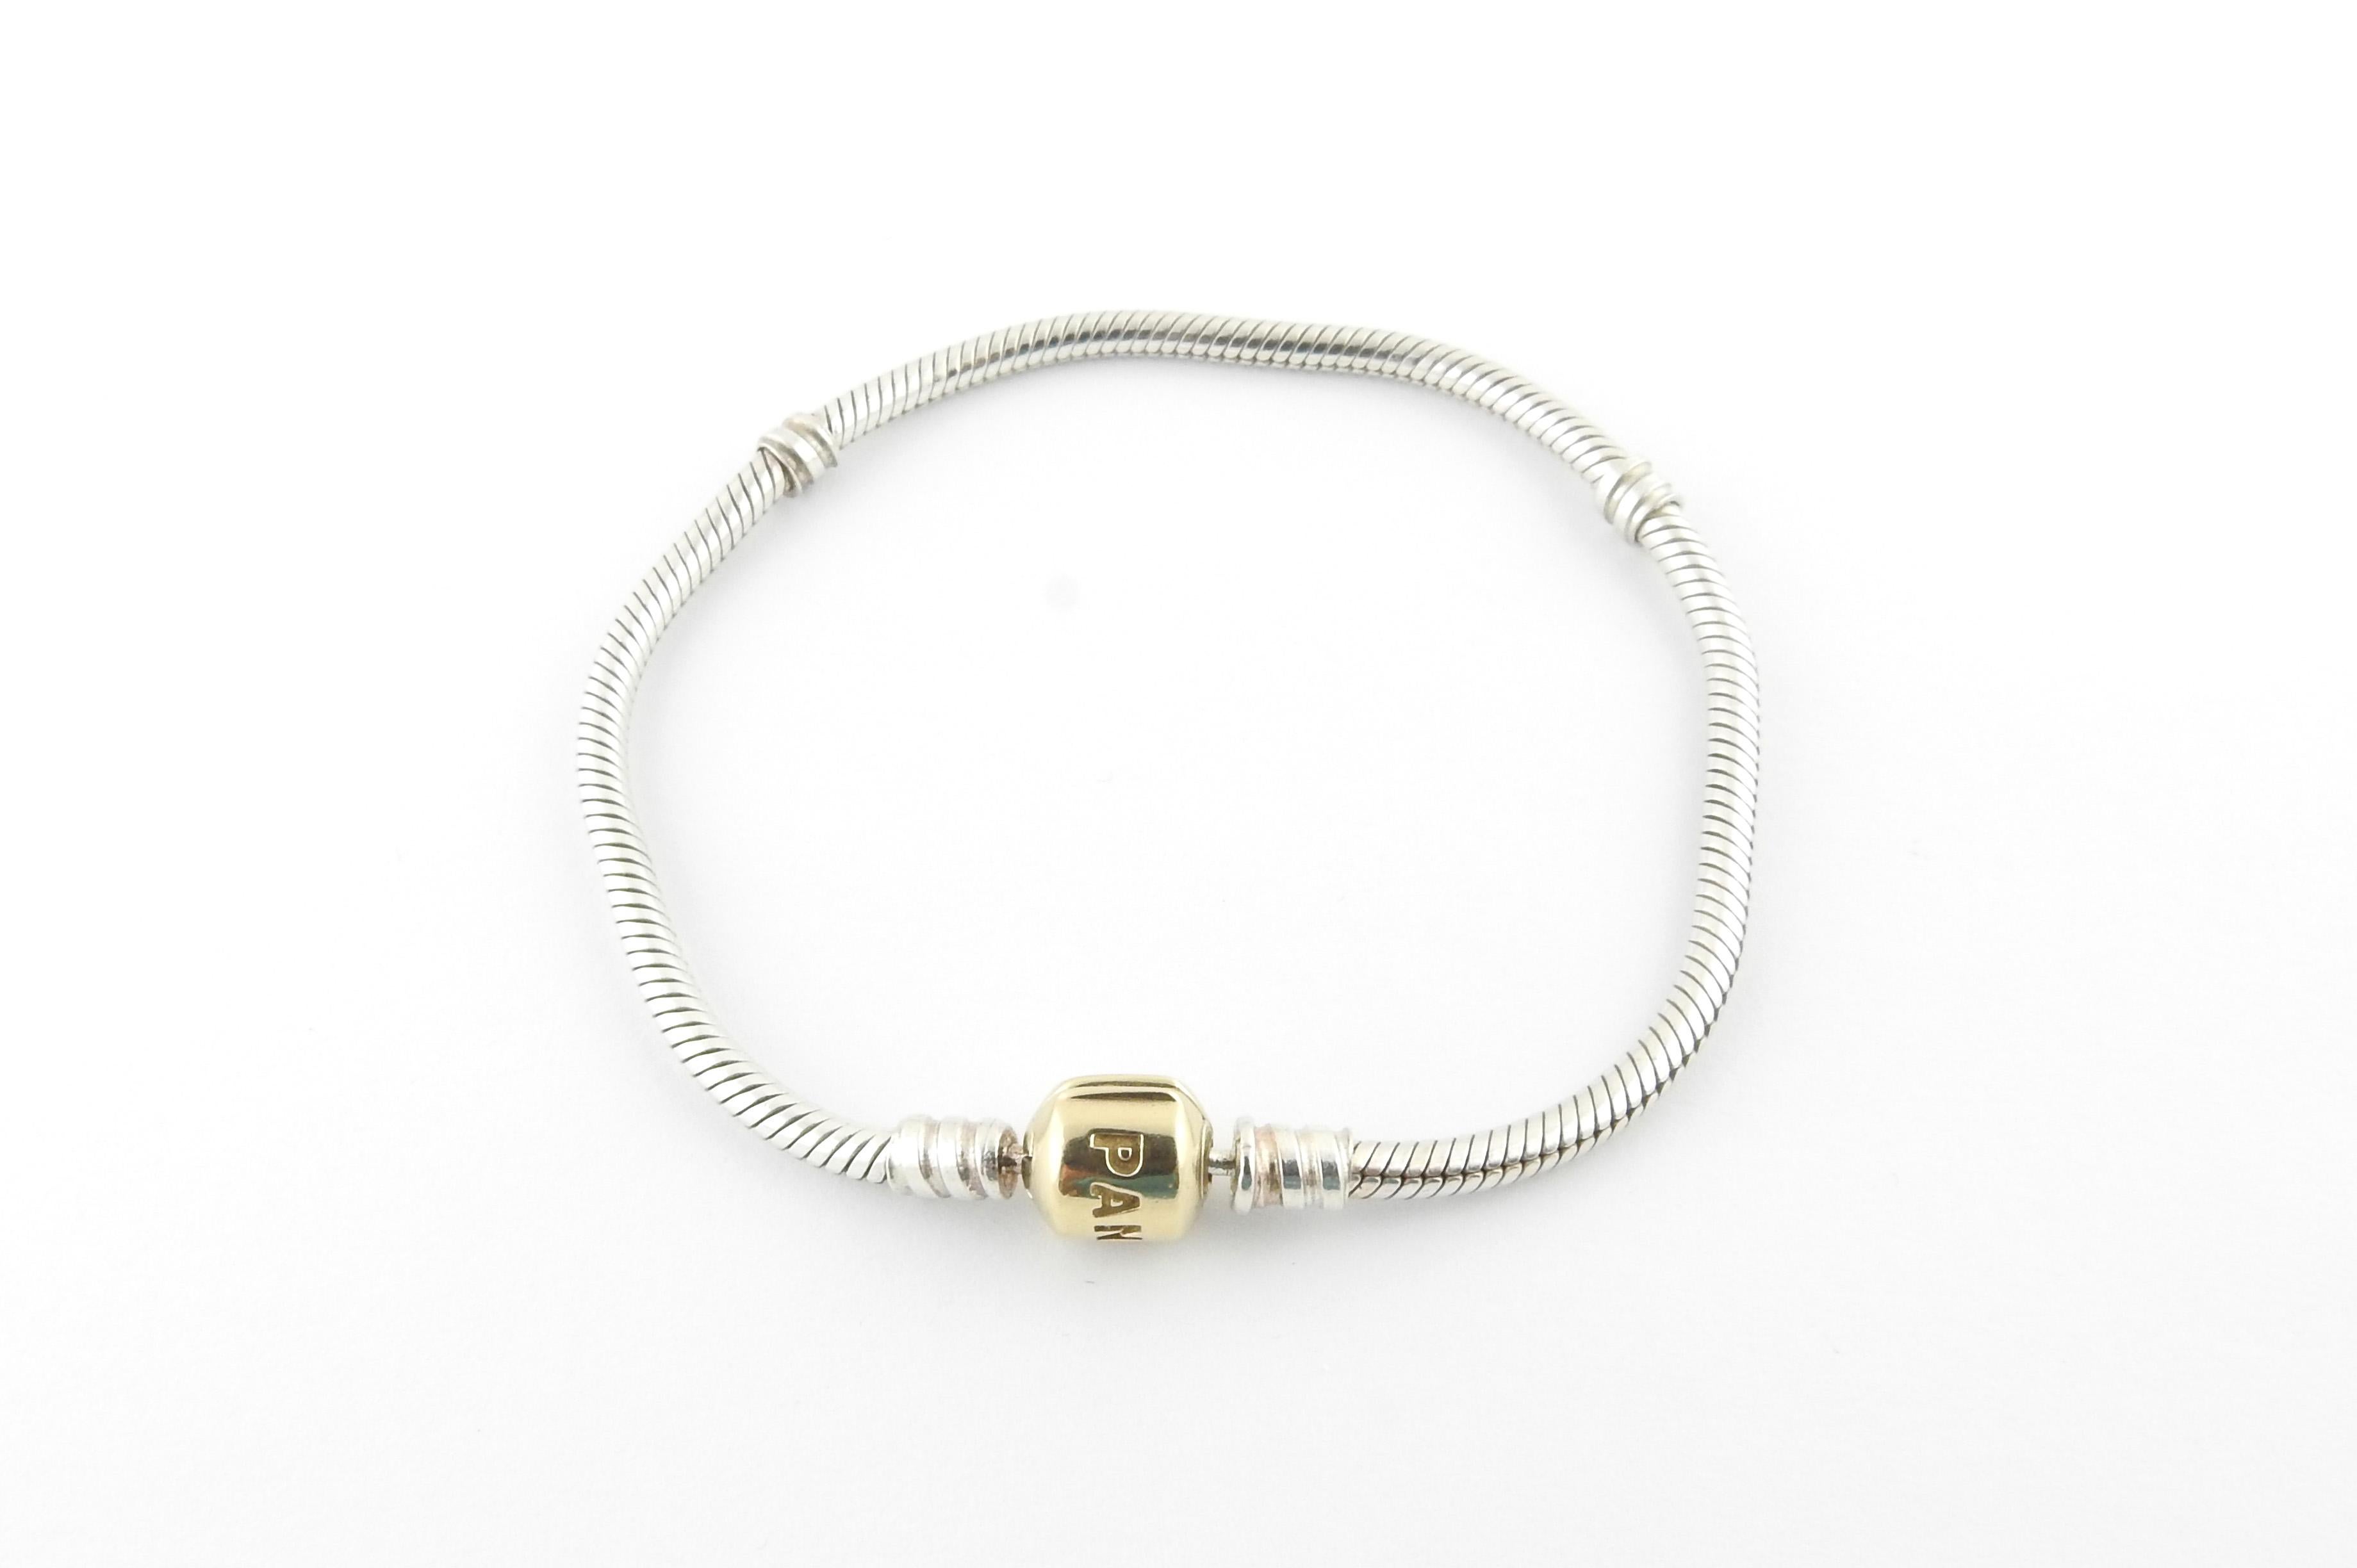 Pandora 14K Yellow Gold Sterling Silver Charm Bracelet

This authentic pandora bracelet is approx. 20cm in length. Measures 7.25